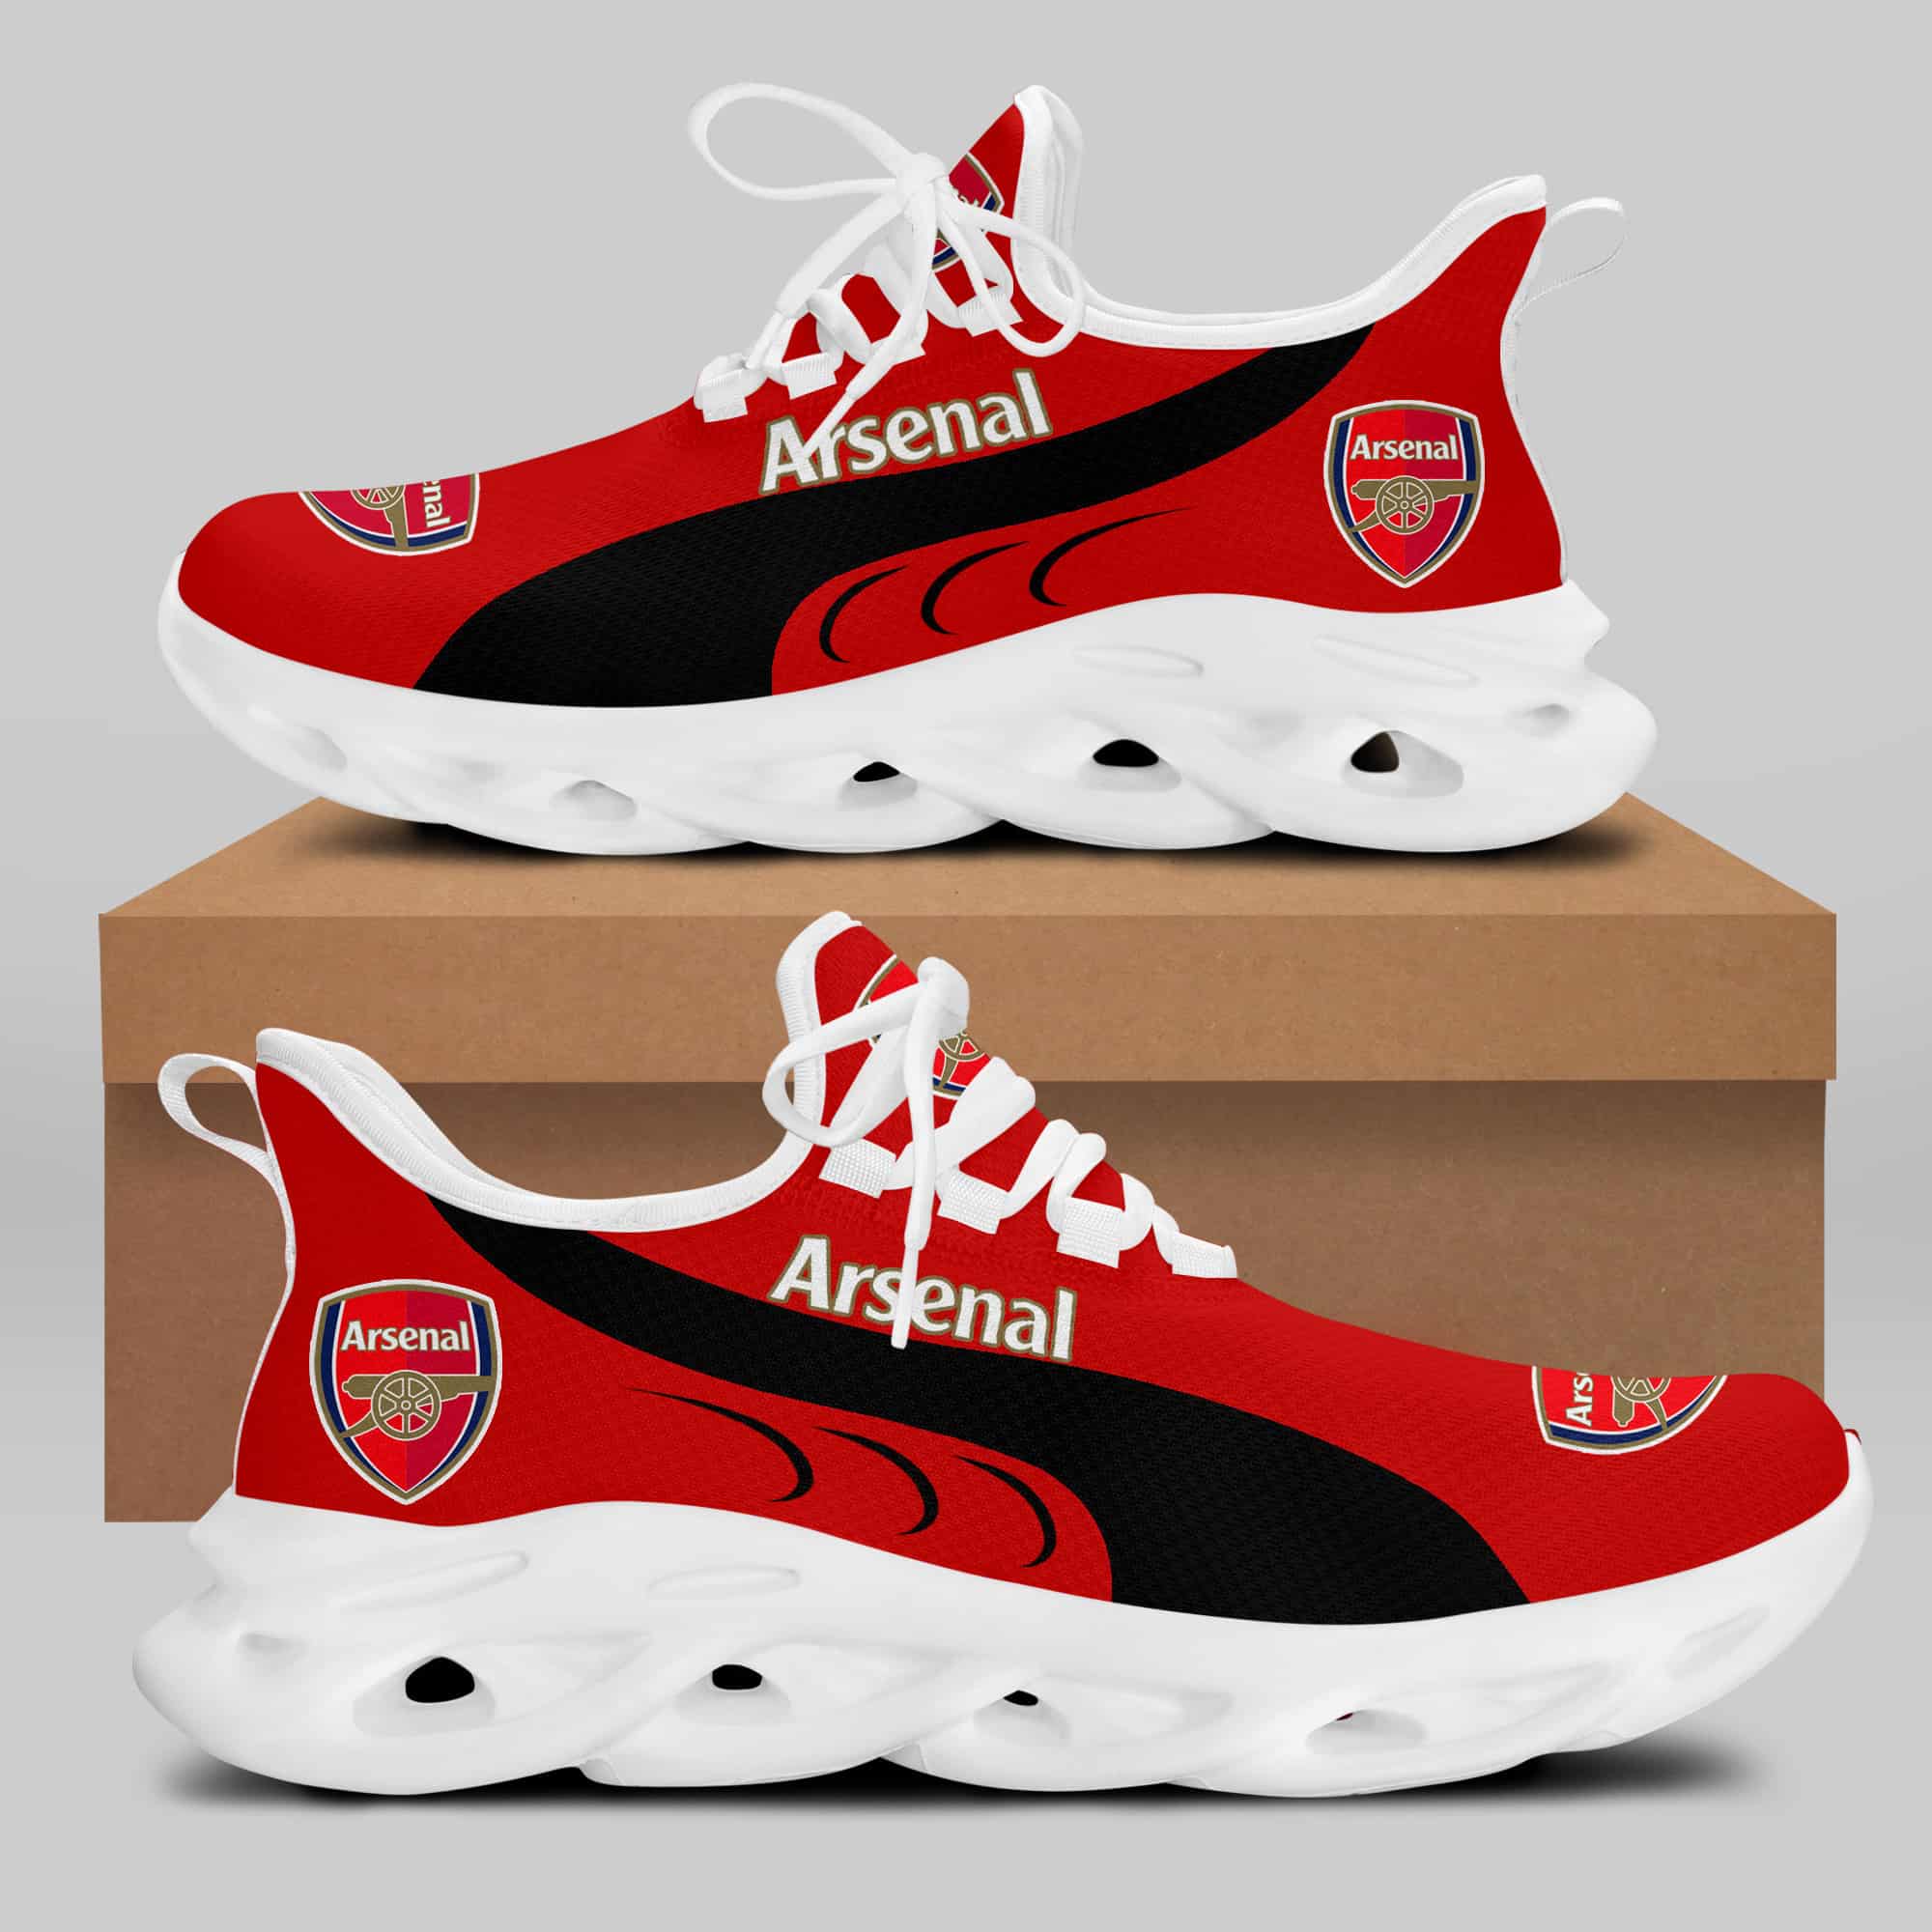 Arsenal Running Shoes Max Soul Shoes Sneakers Ver 1 2